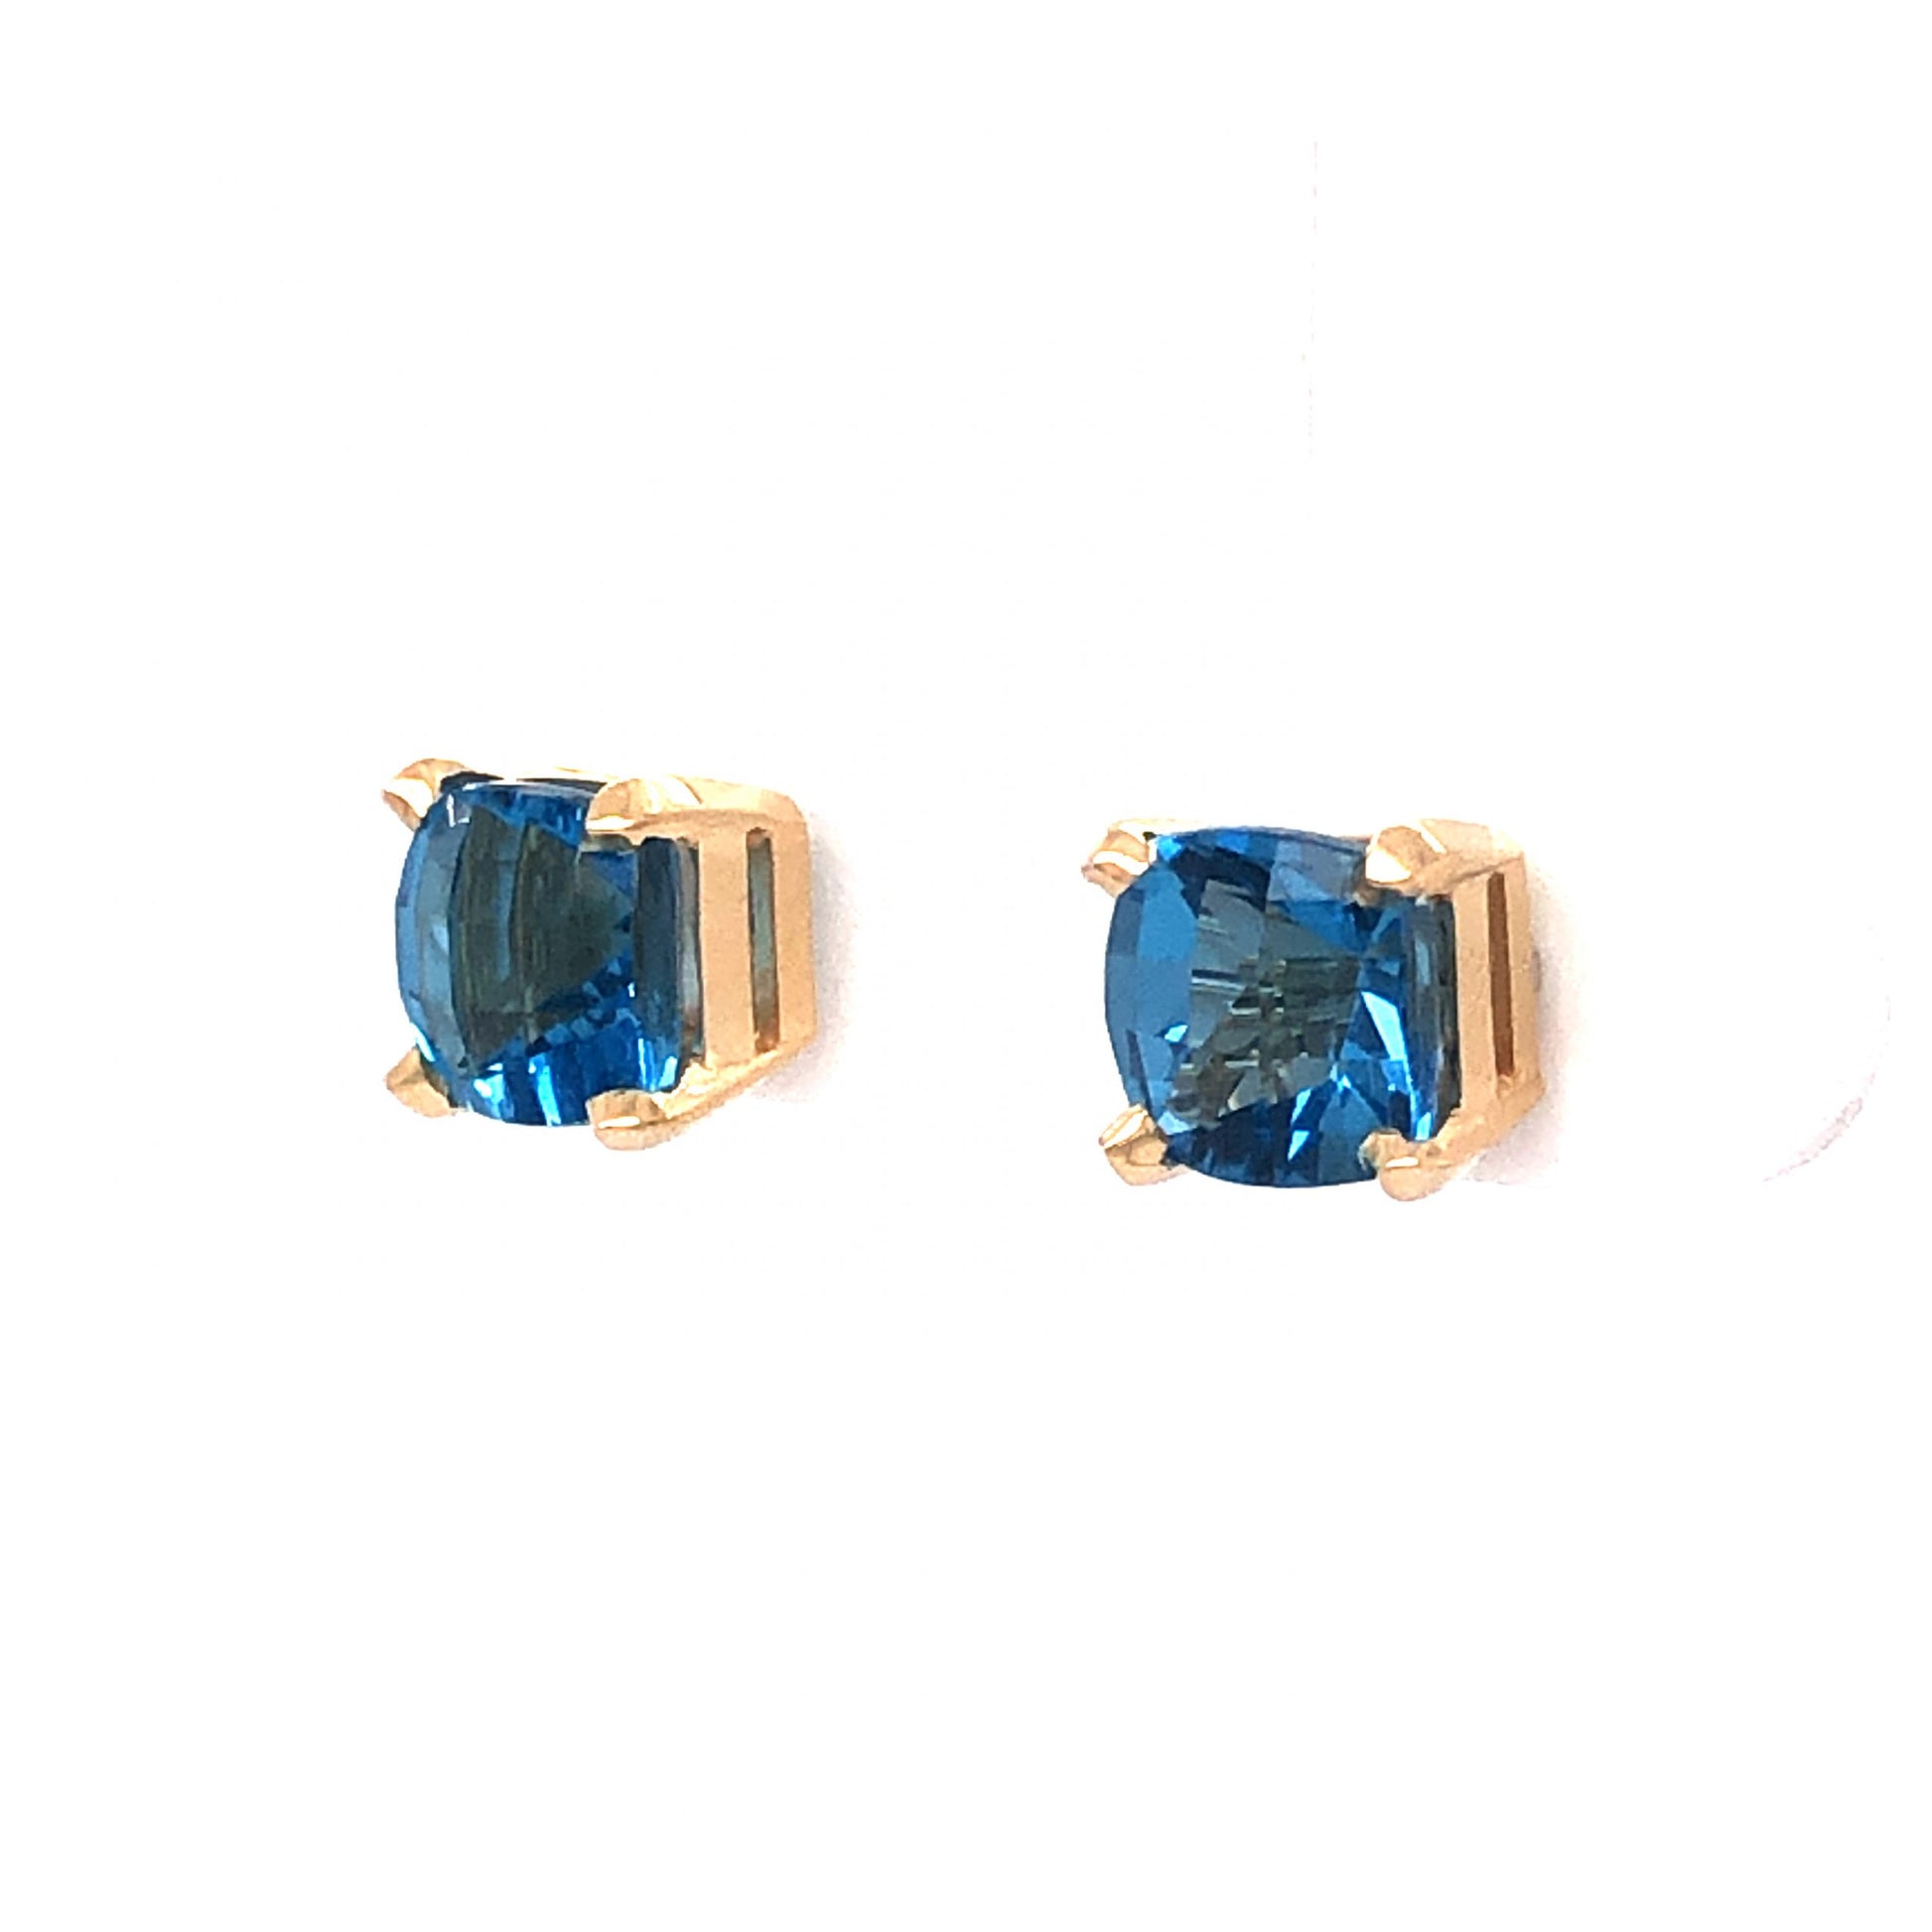 Checkerboard Faceted Blue Topaz Stud Earrings in 14k Yellow GoldComposition: Platinum Total Gram Weight: 3.1 g Inscription: 14k
      